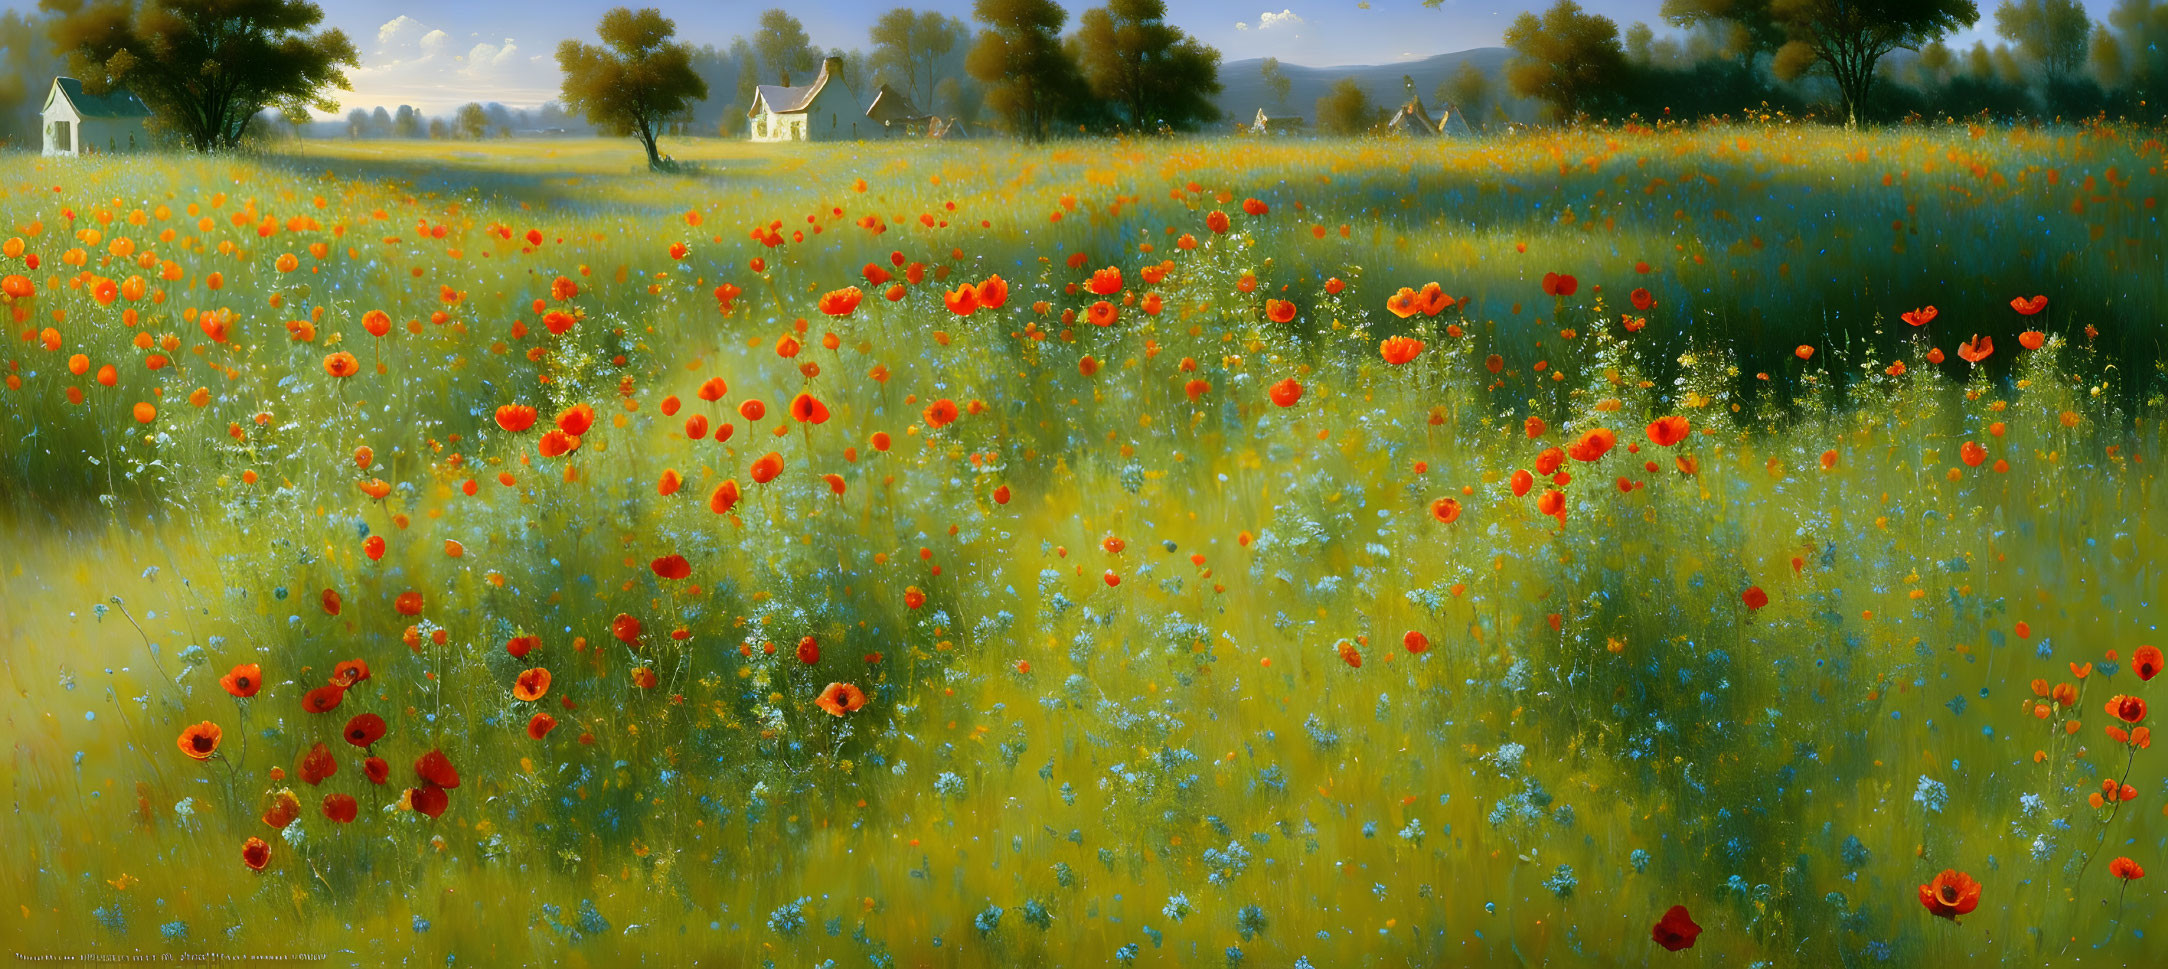 Tranquil landscape with red poppies, golden light, and distant houses